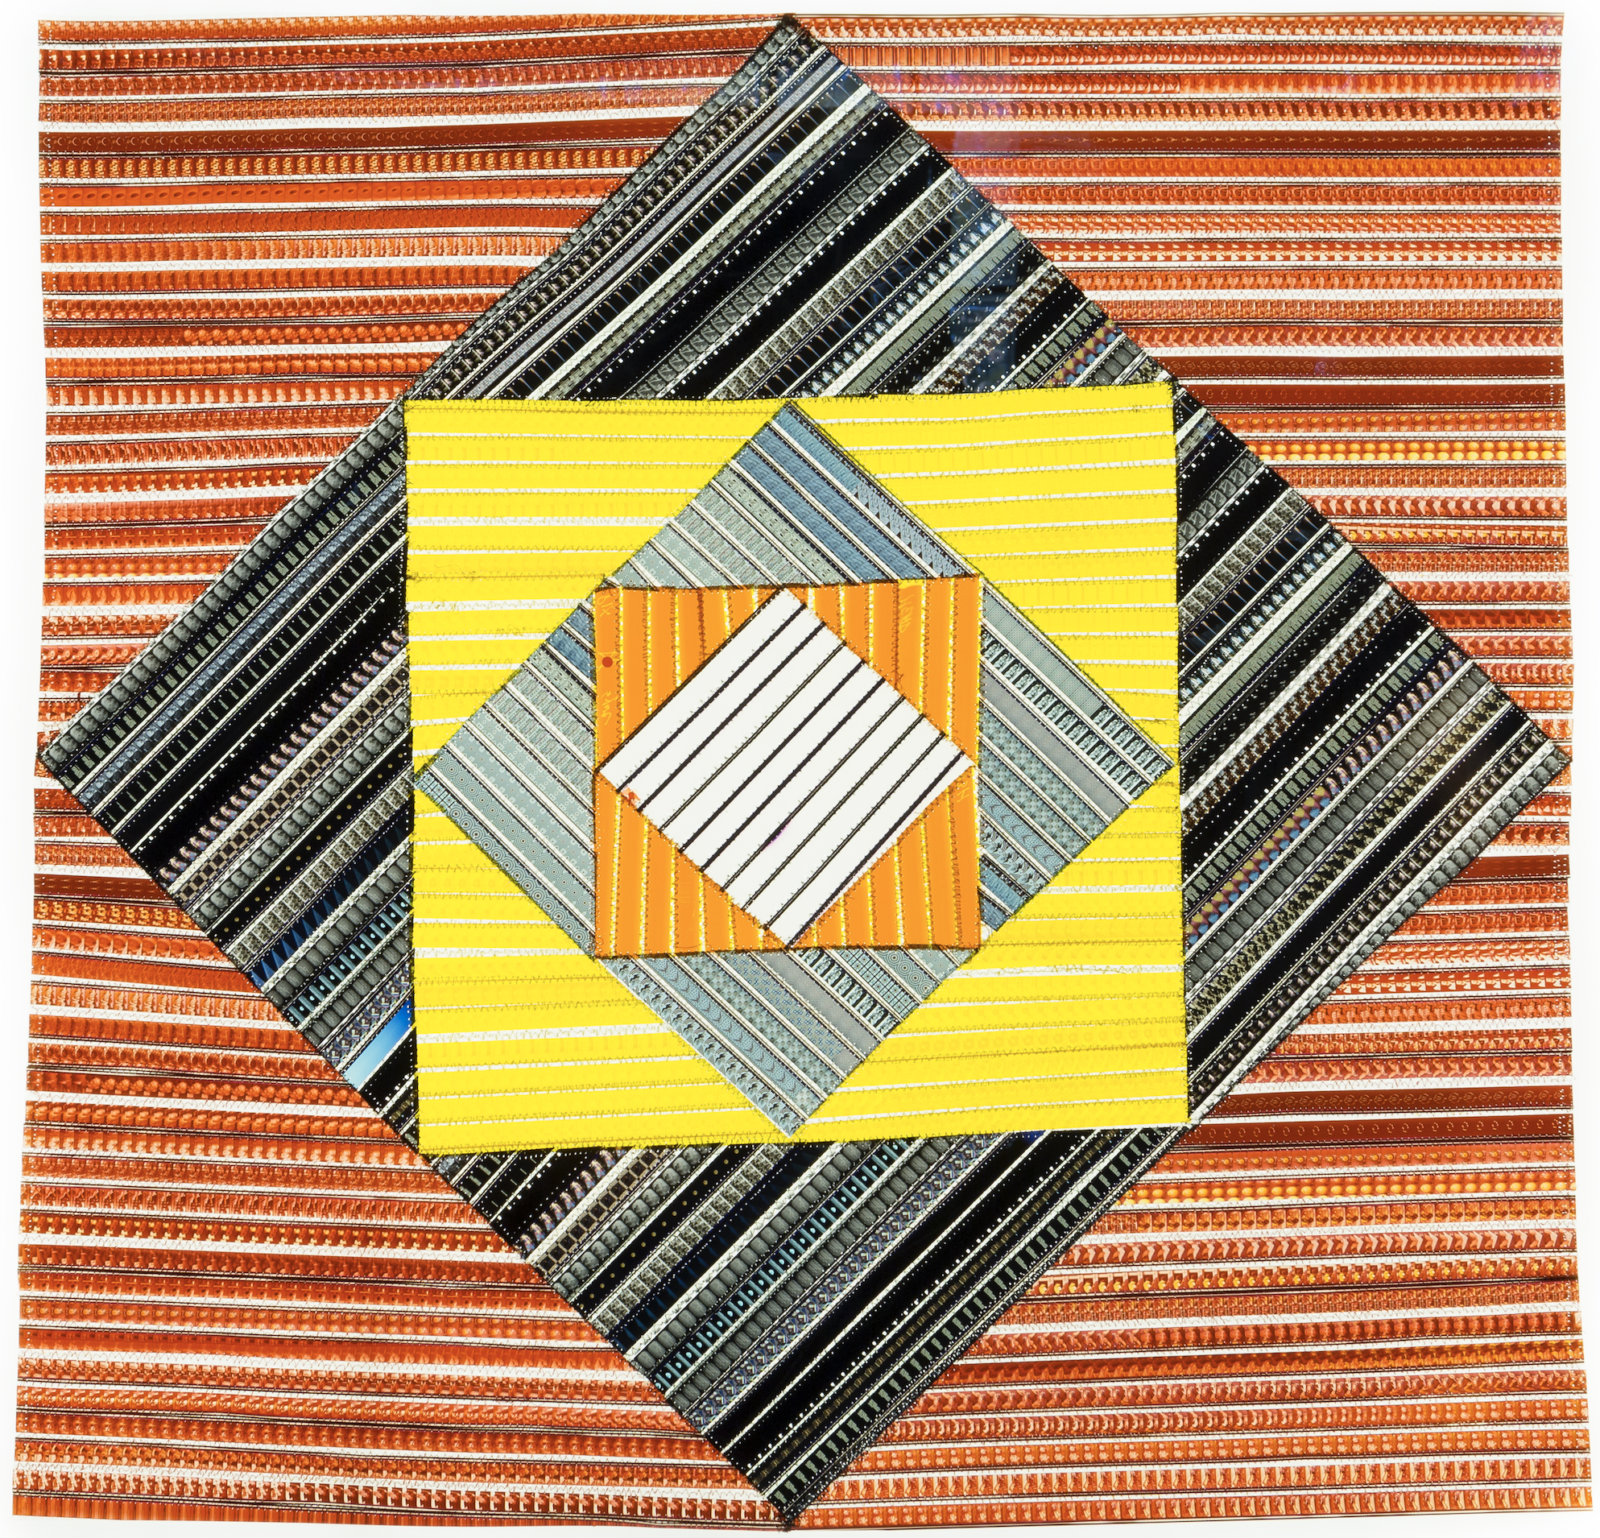 This “film quilt” on a lightbox is comprised of 16mm filmstrips sewn into a pattern evoking a quilt motif.